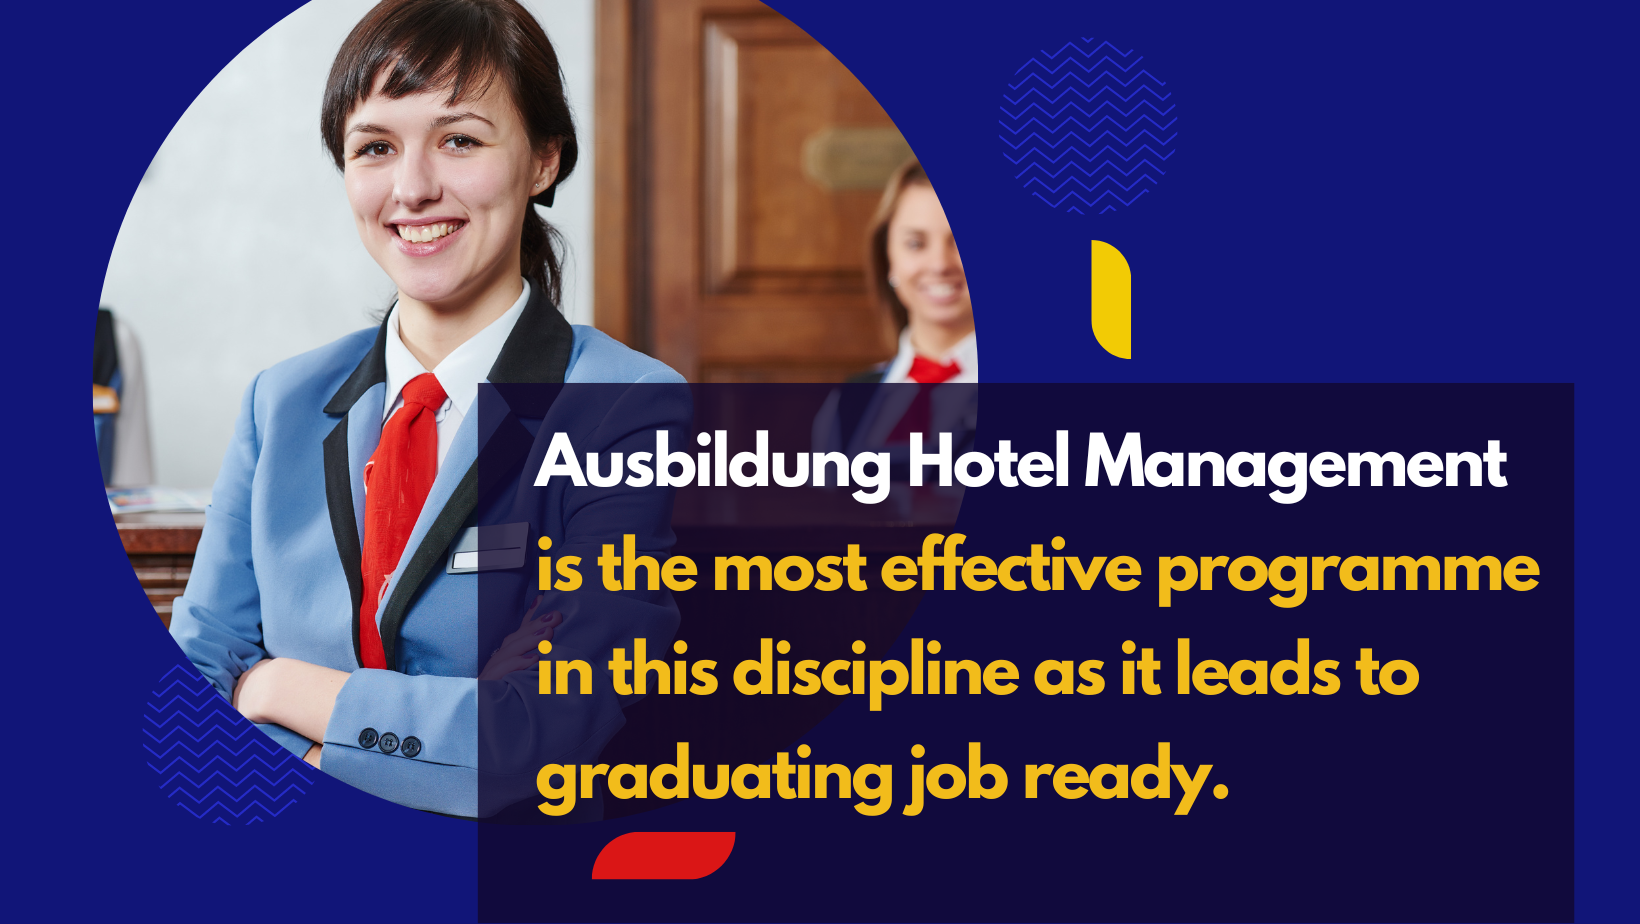 What makes Germany attractive among all the other countries for Hotel management studies now